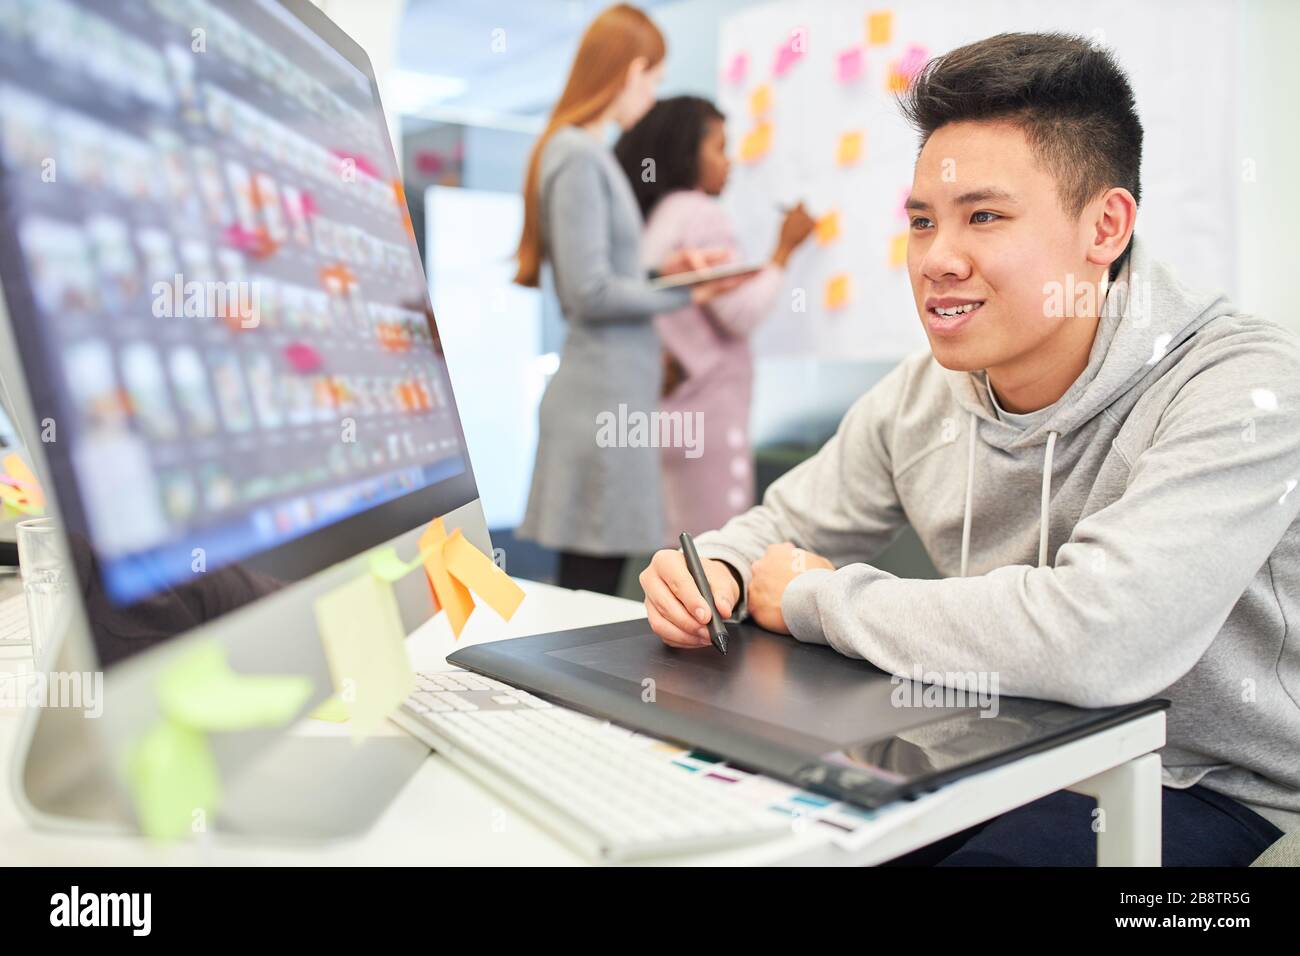 Asian as a graphic designer with pen and tablet designs the layout for a website Stock Photo